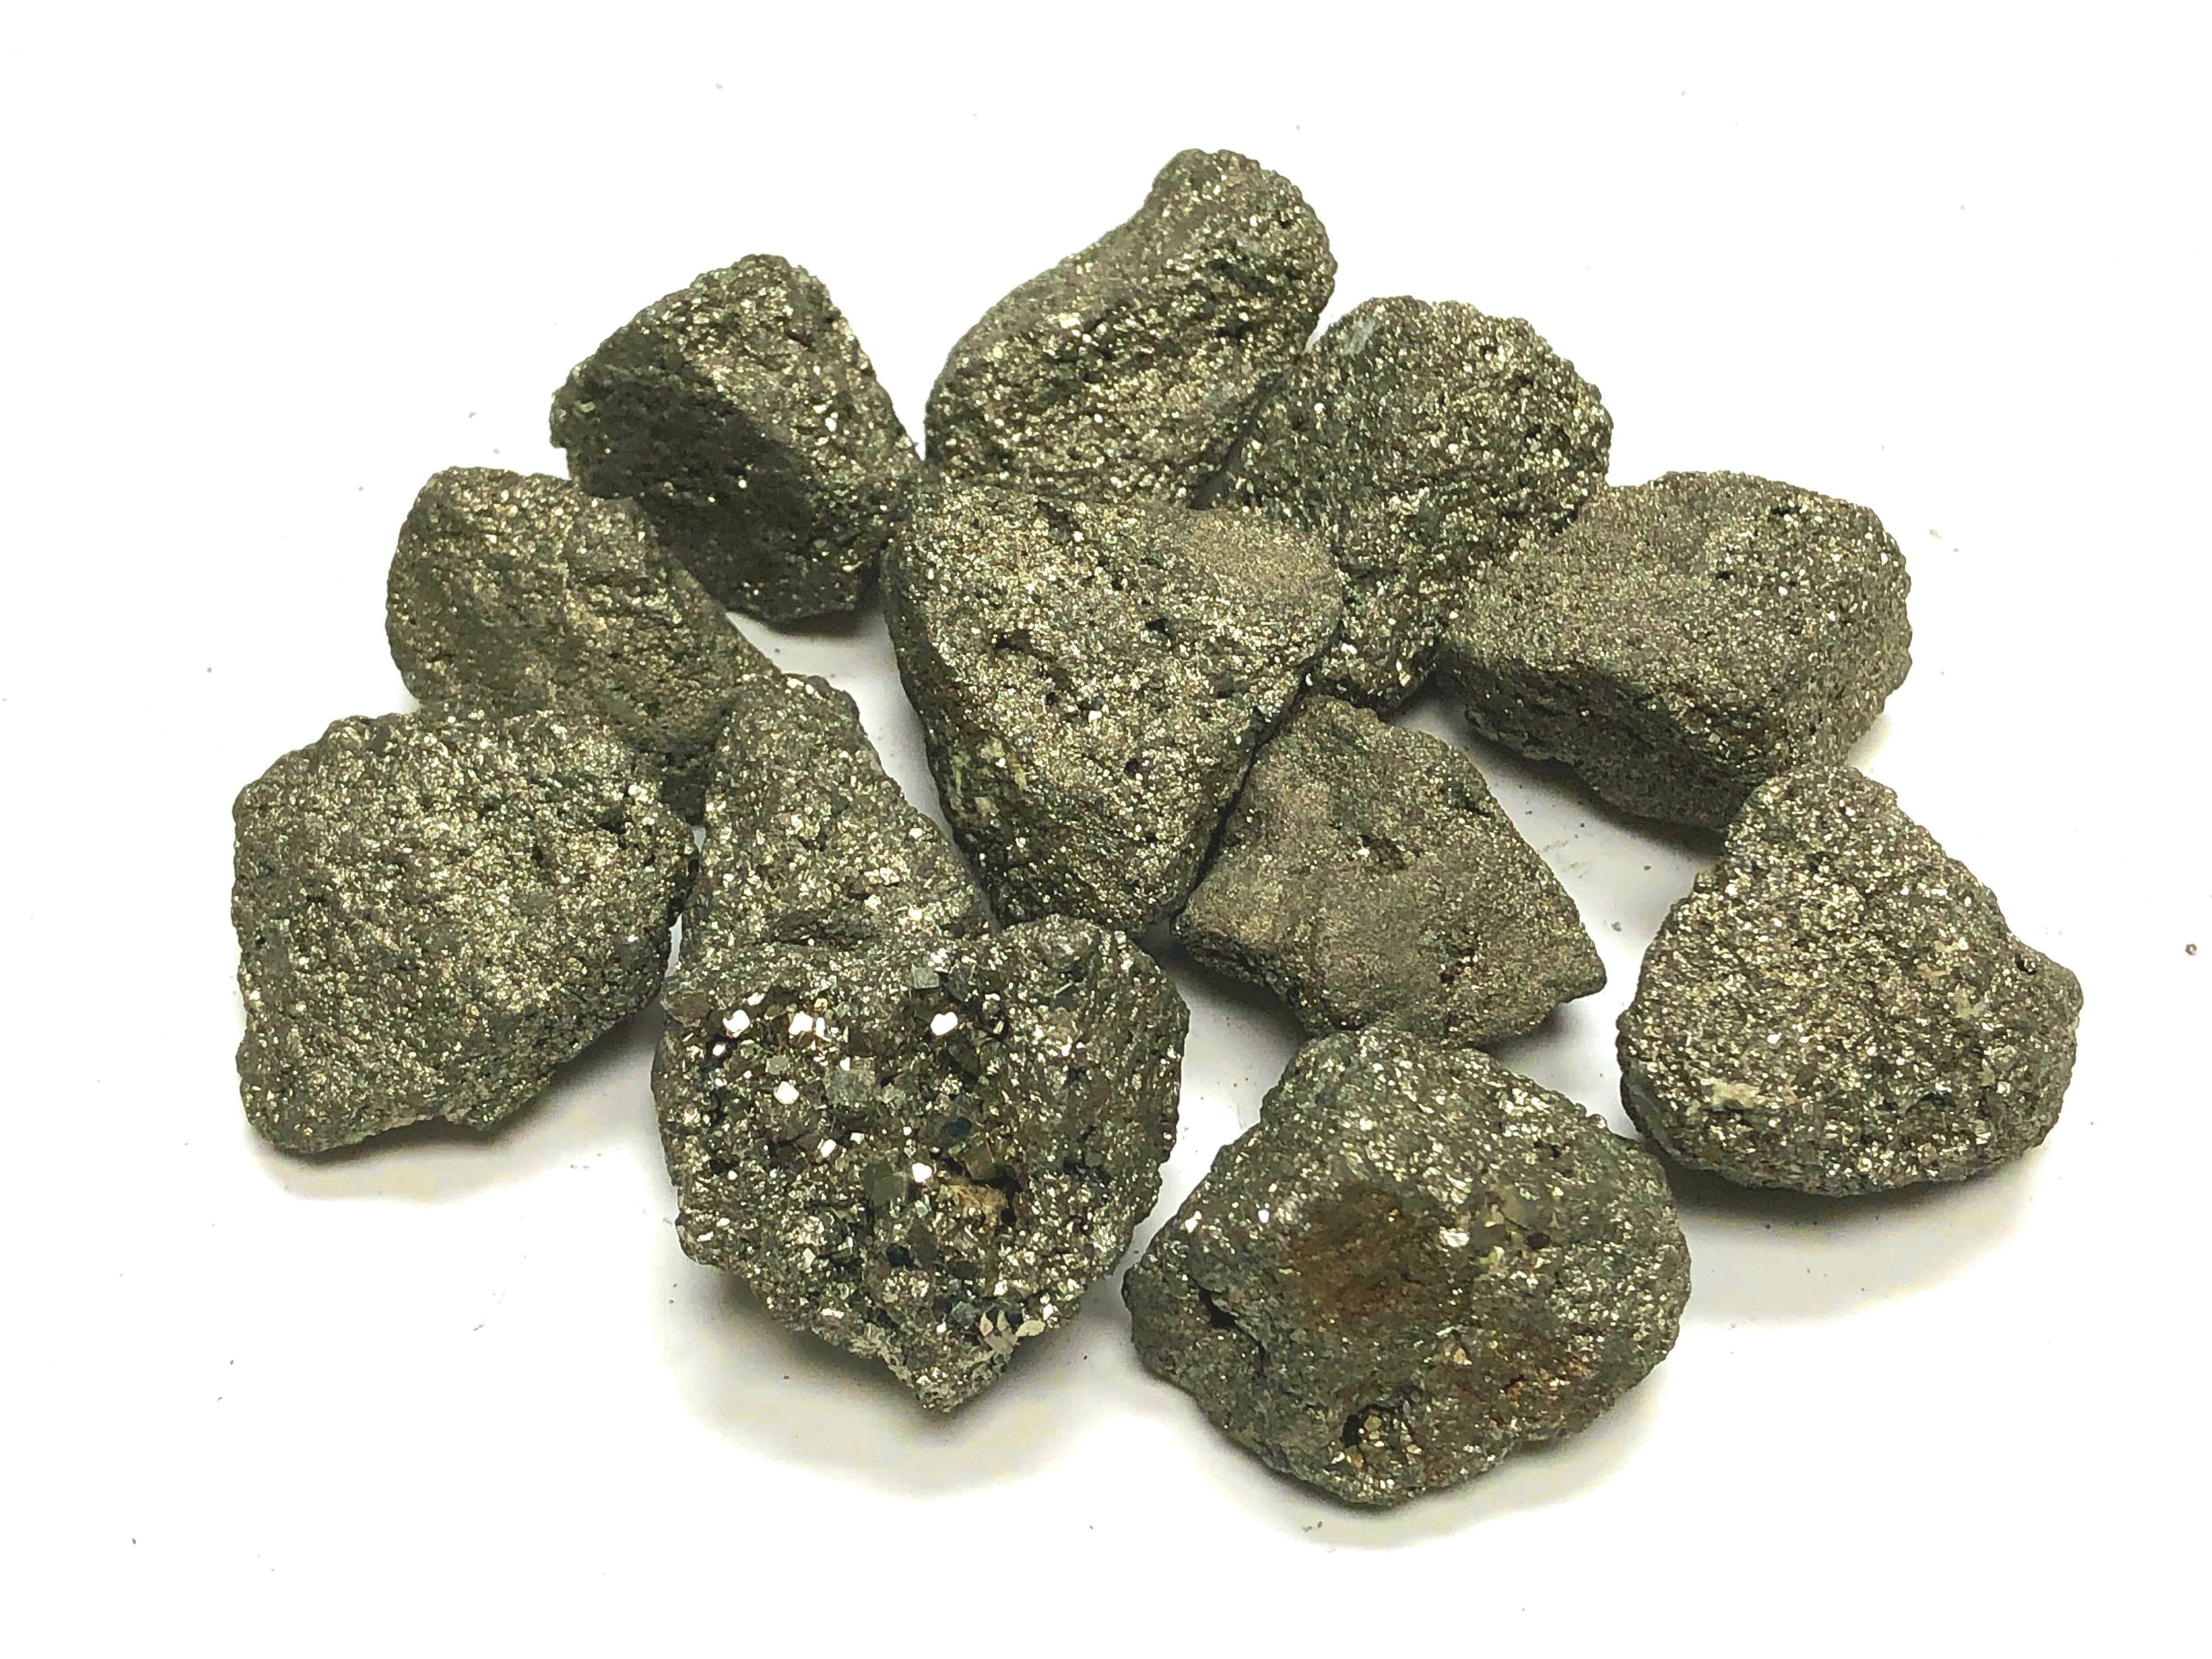 Kid Party Nice Sized Chunks PYRITE Fool's Gold Rough Rocks Stones 1 Lb Lots 